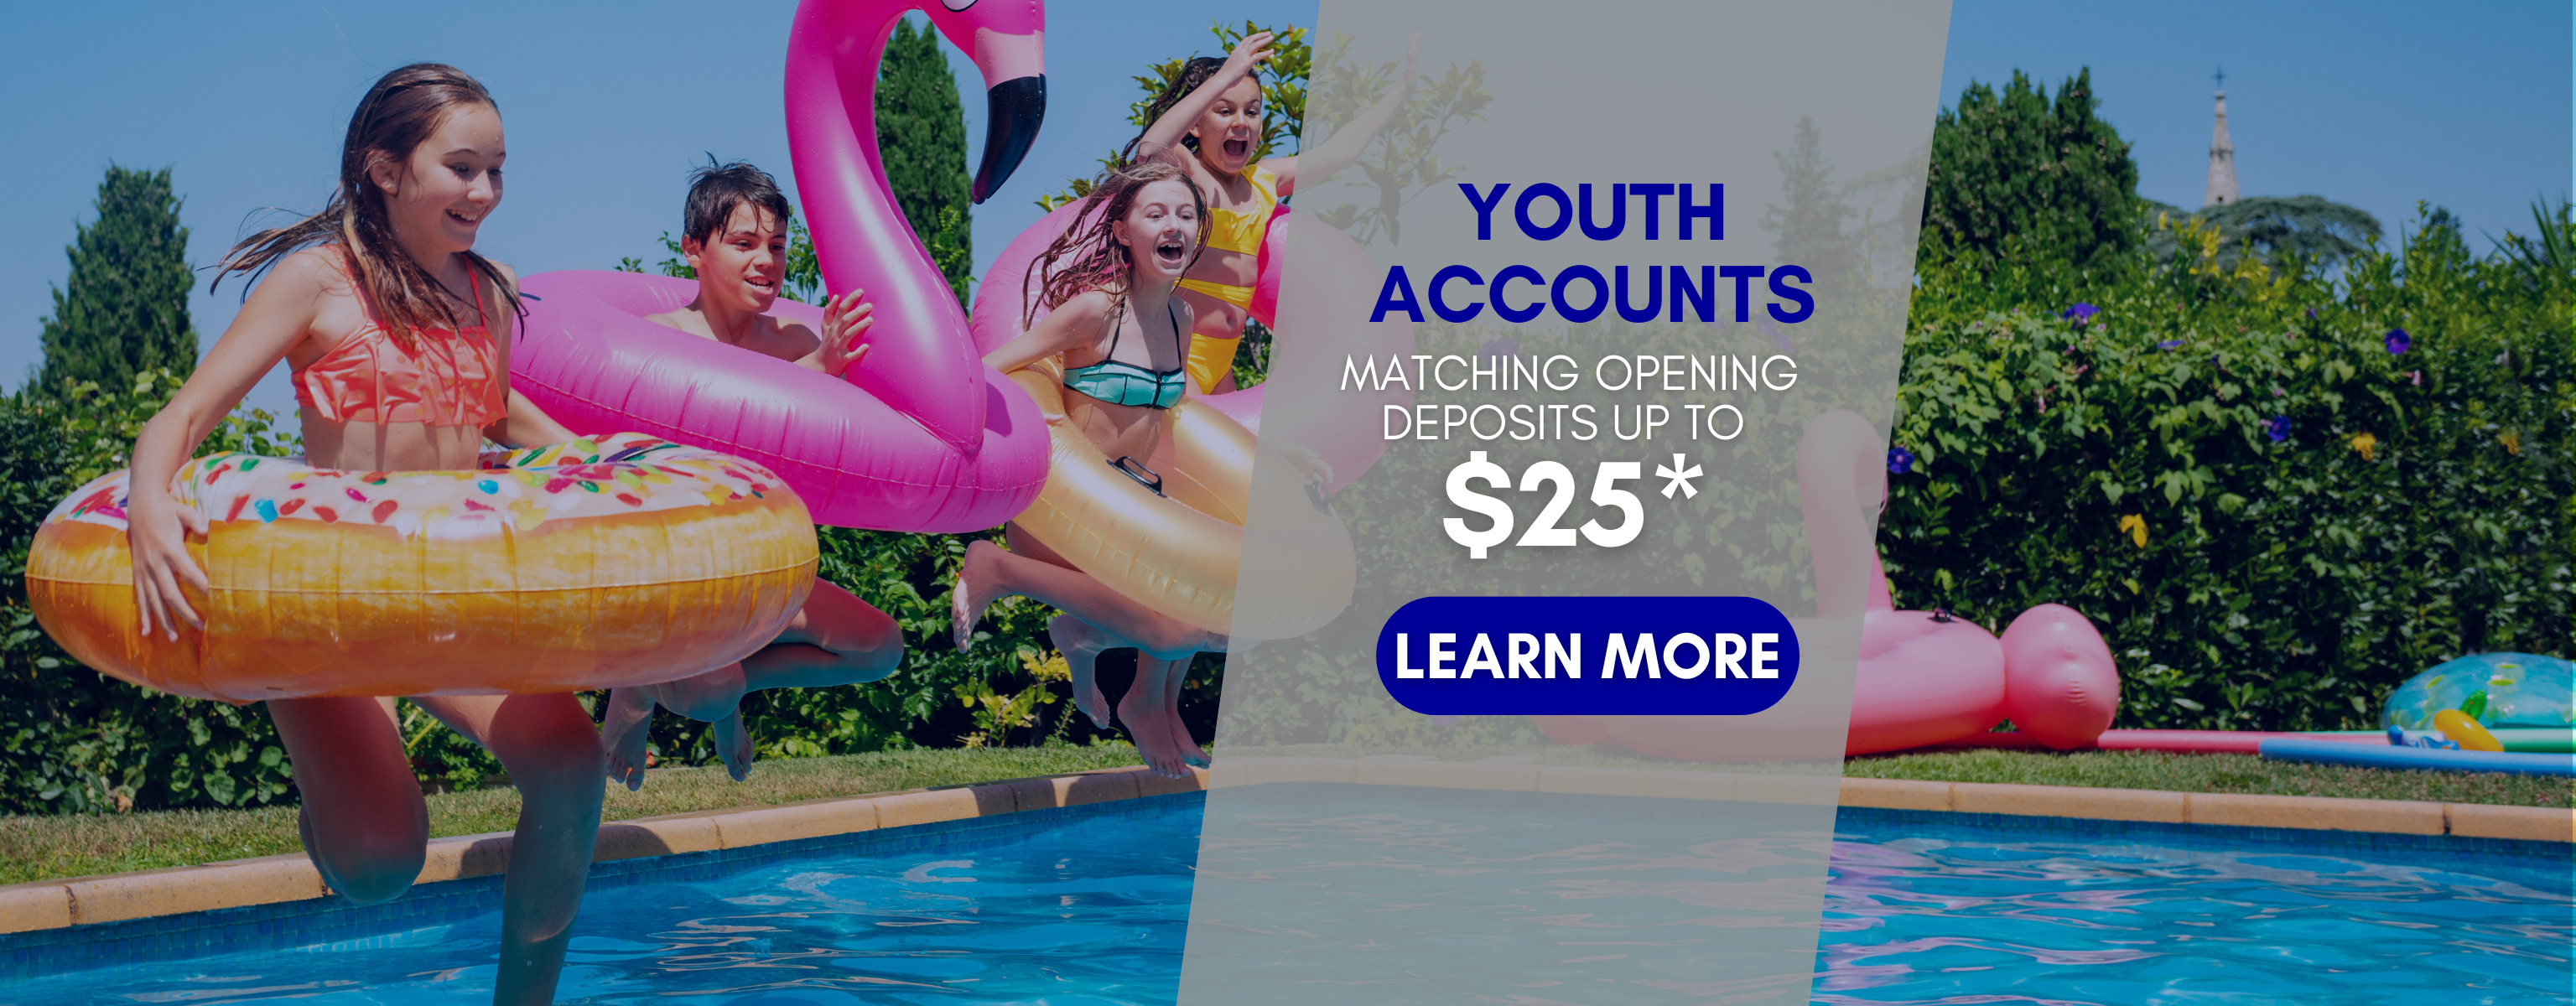 Youth Accounts Matching Opening Deposits up to $25